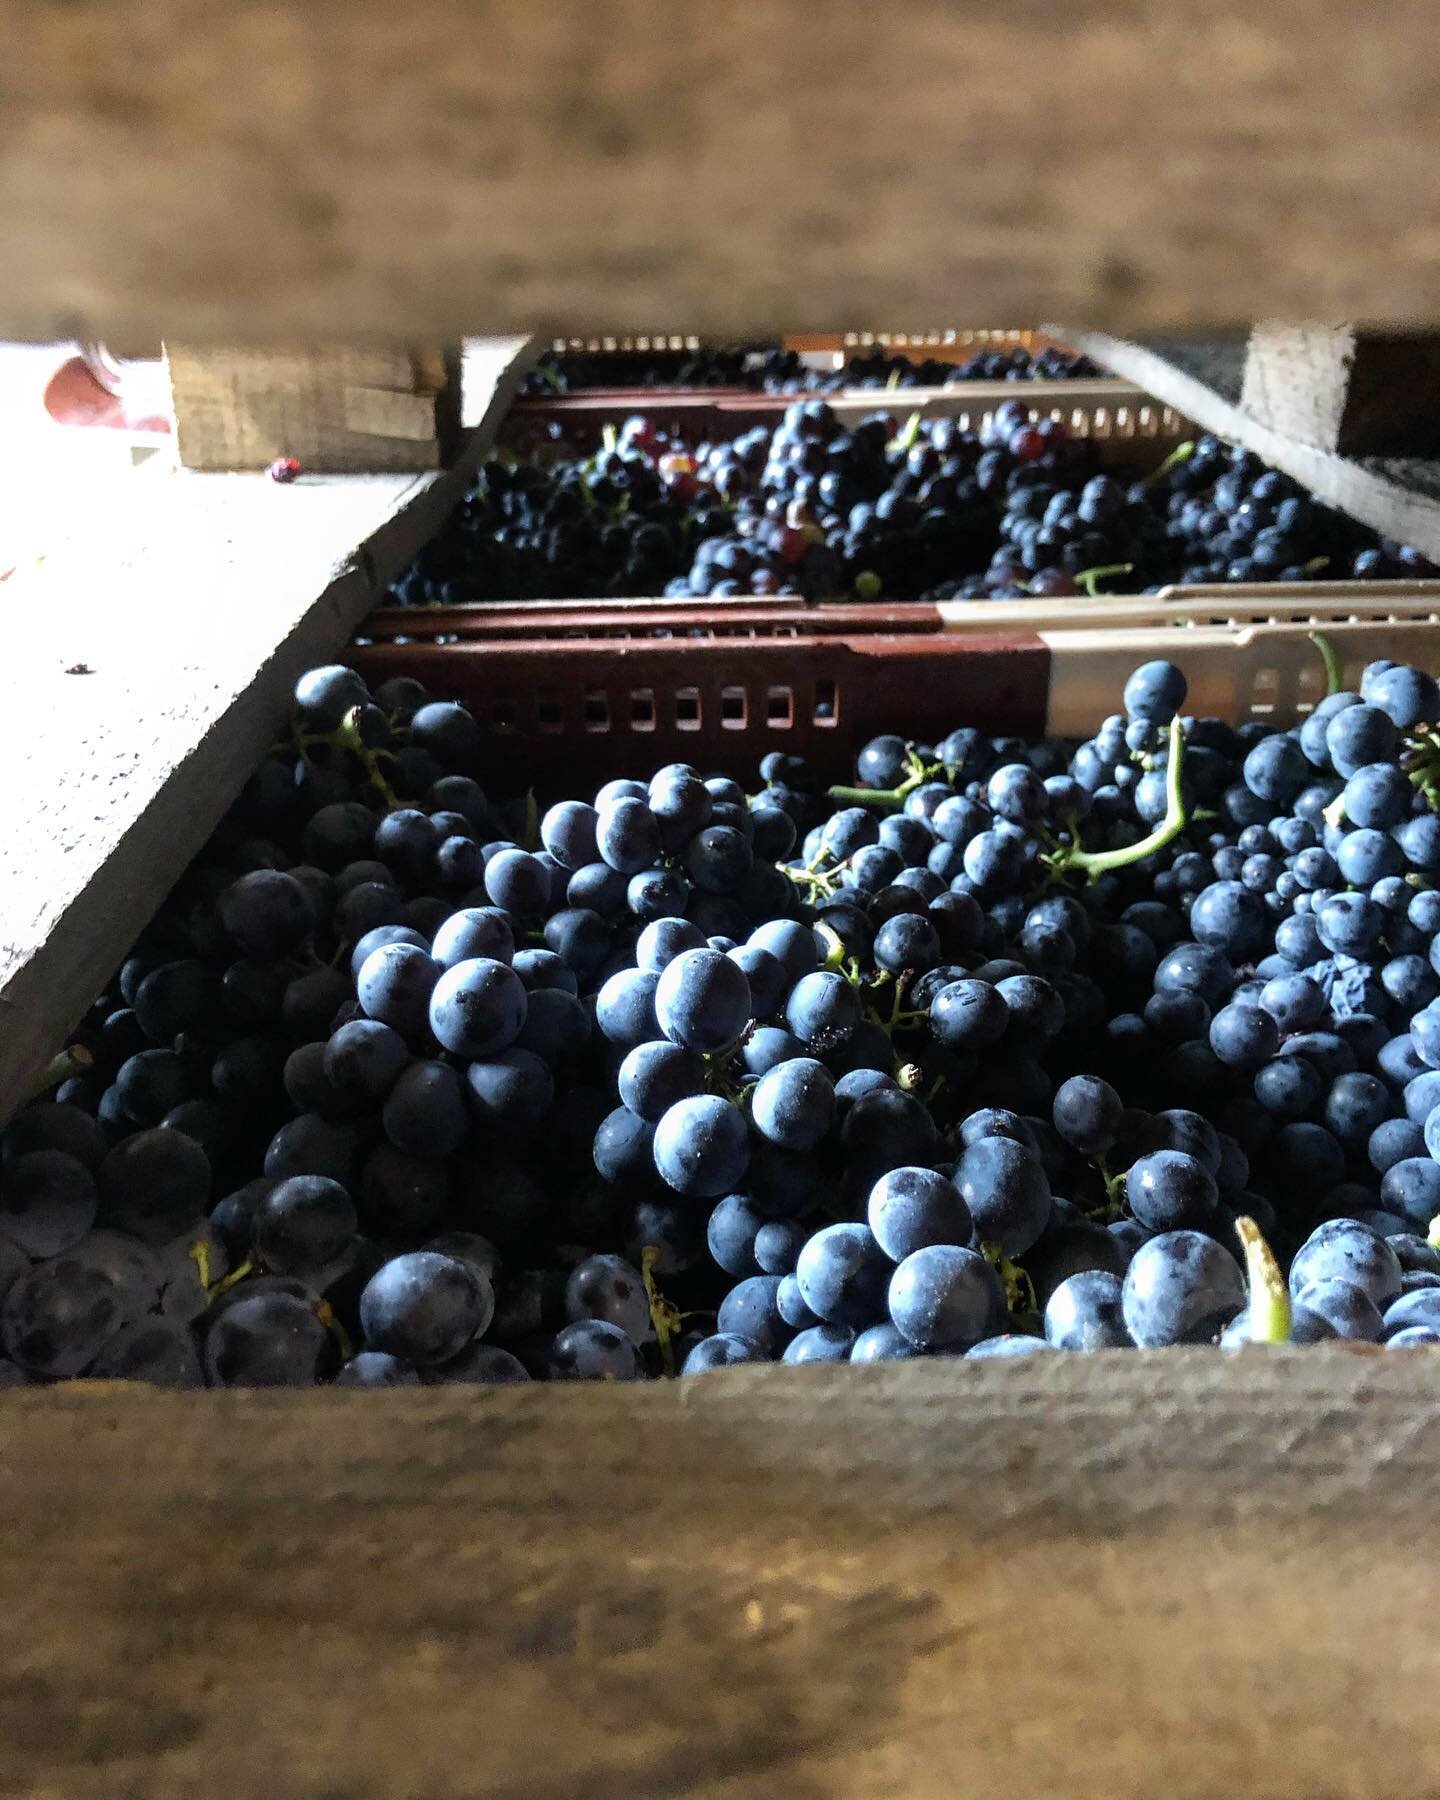 Gamay harvest @jeanclaudelapalu  comes to a close in Beaujolais as the smell of sweet fermenting juice fills the cellar and bubbles over.  The charolais beef cooked &ldquo;bleu&rdquo; was delicious.  Thank you for the wonderful afternoon even if we g